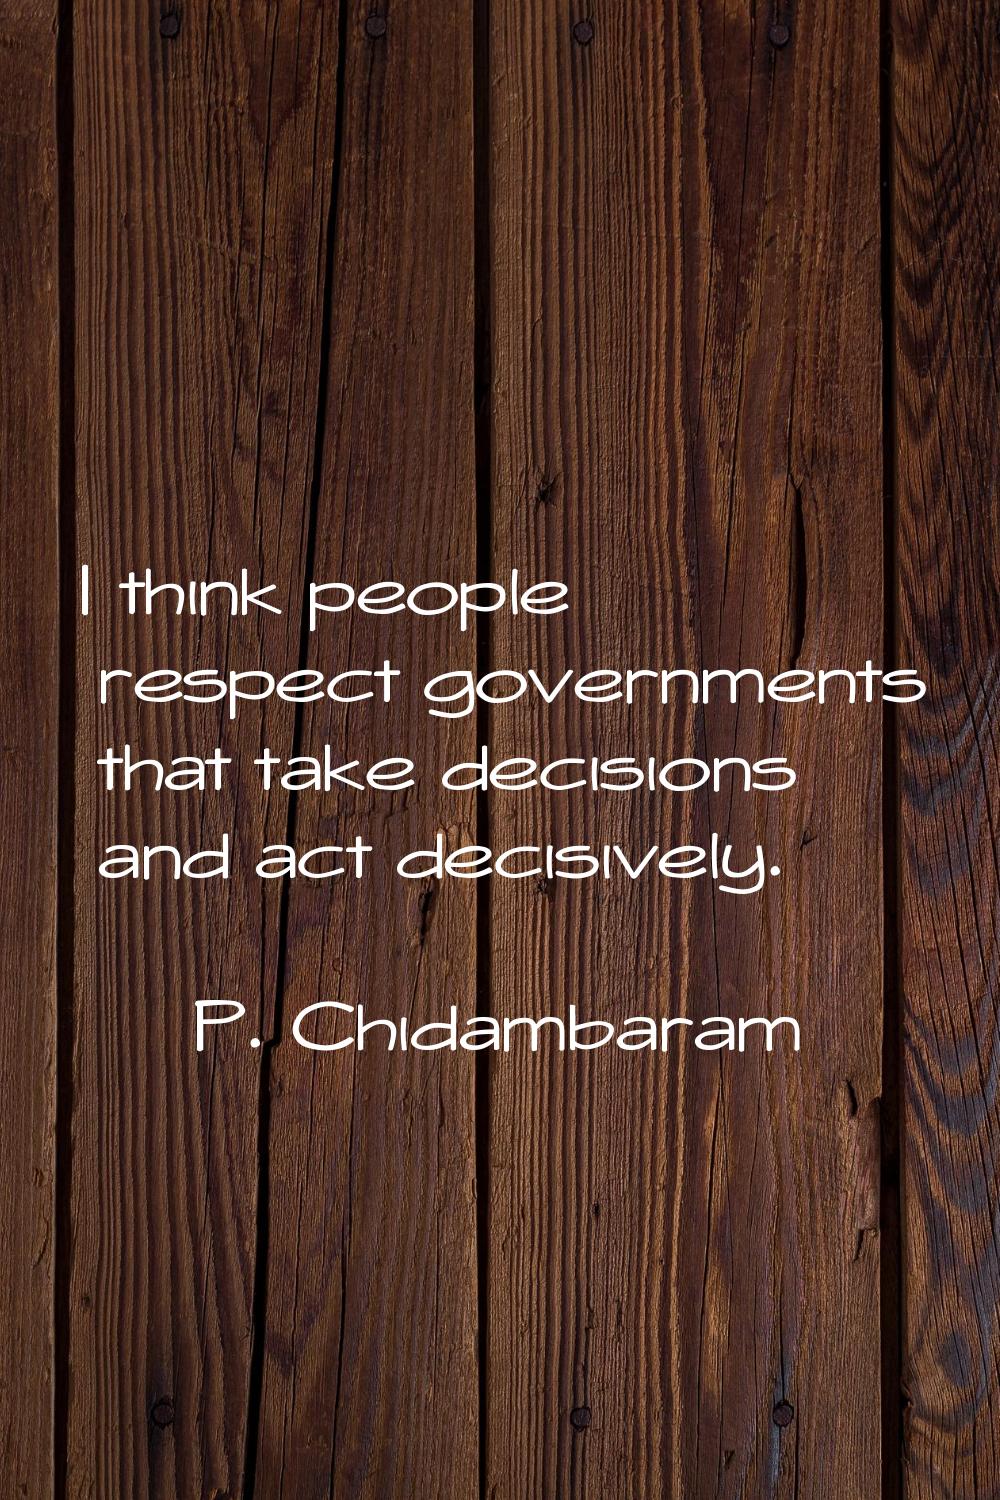 I think people respect governments that take decisions and act decisively.